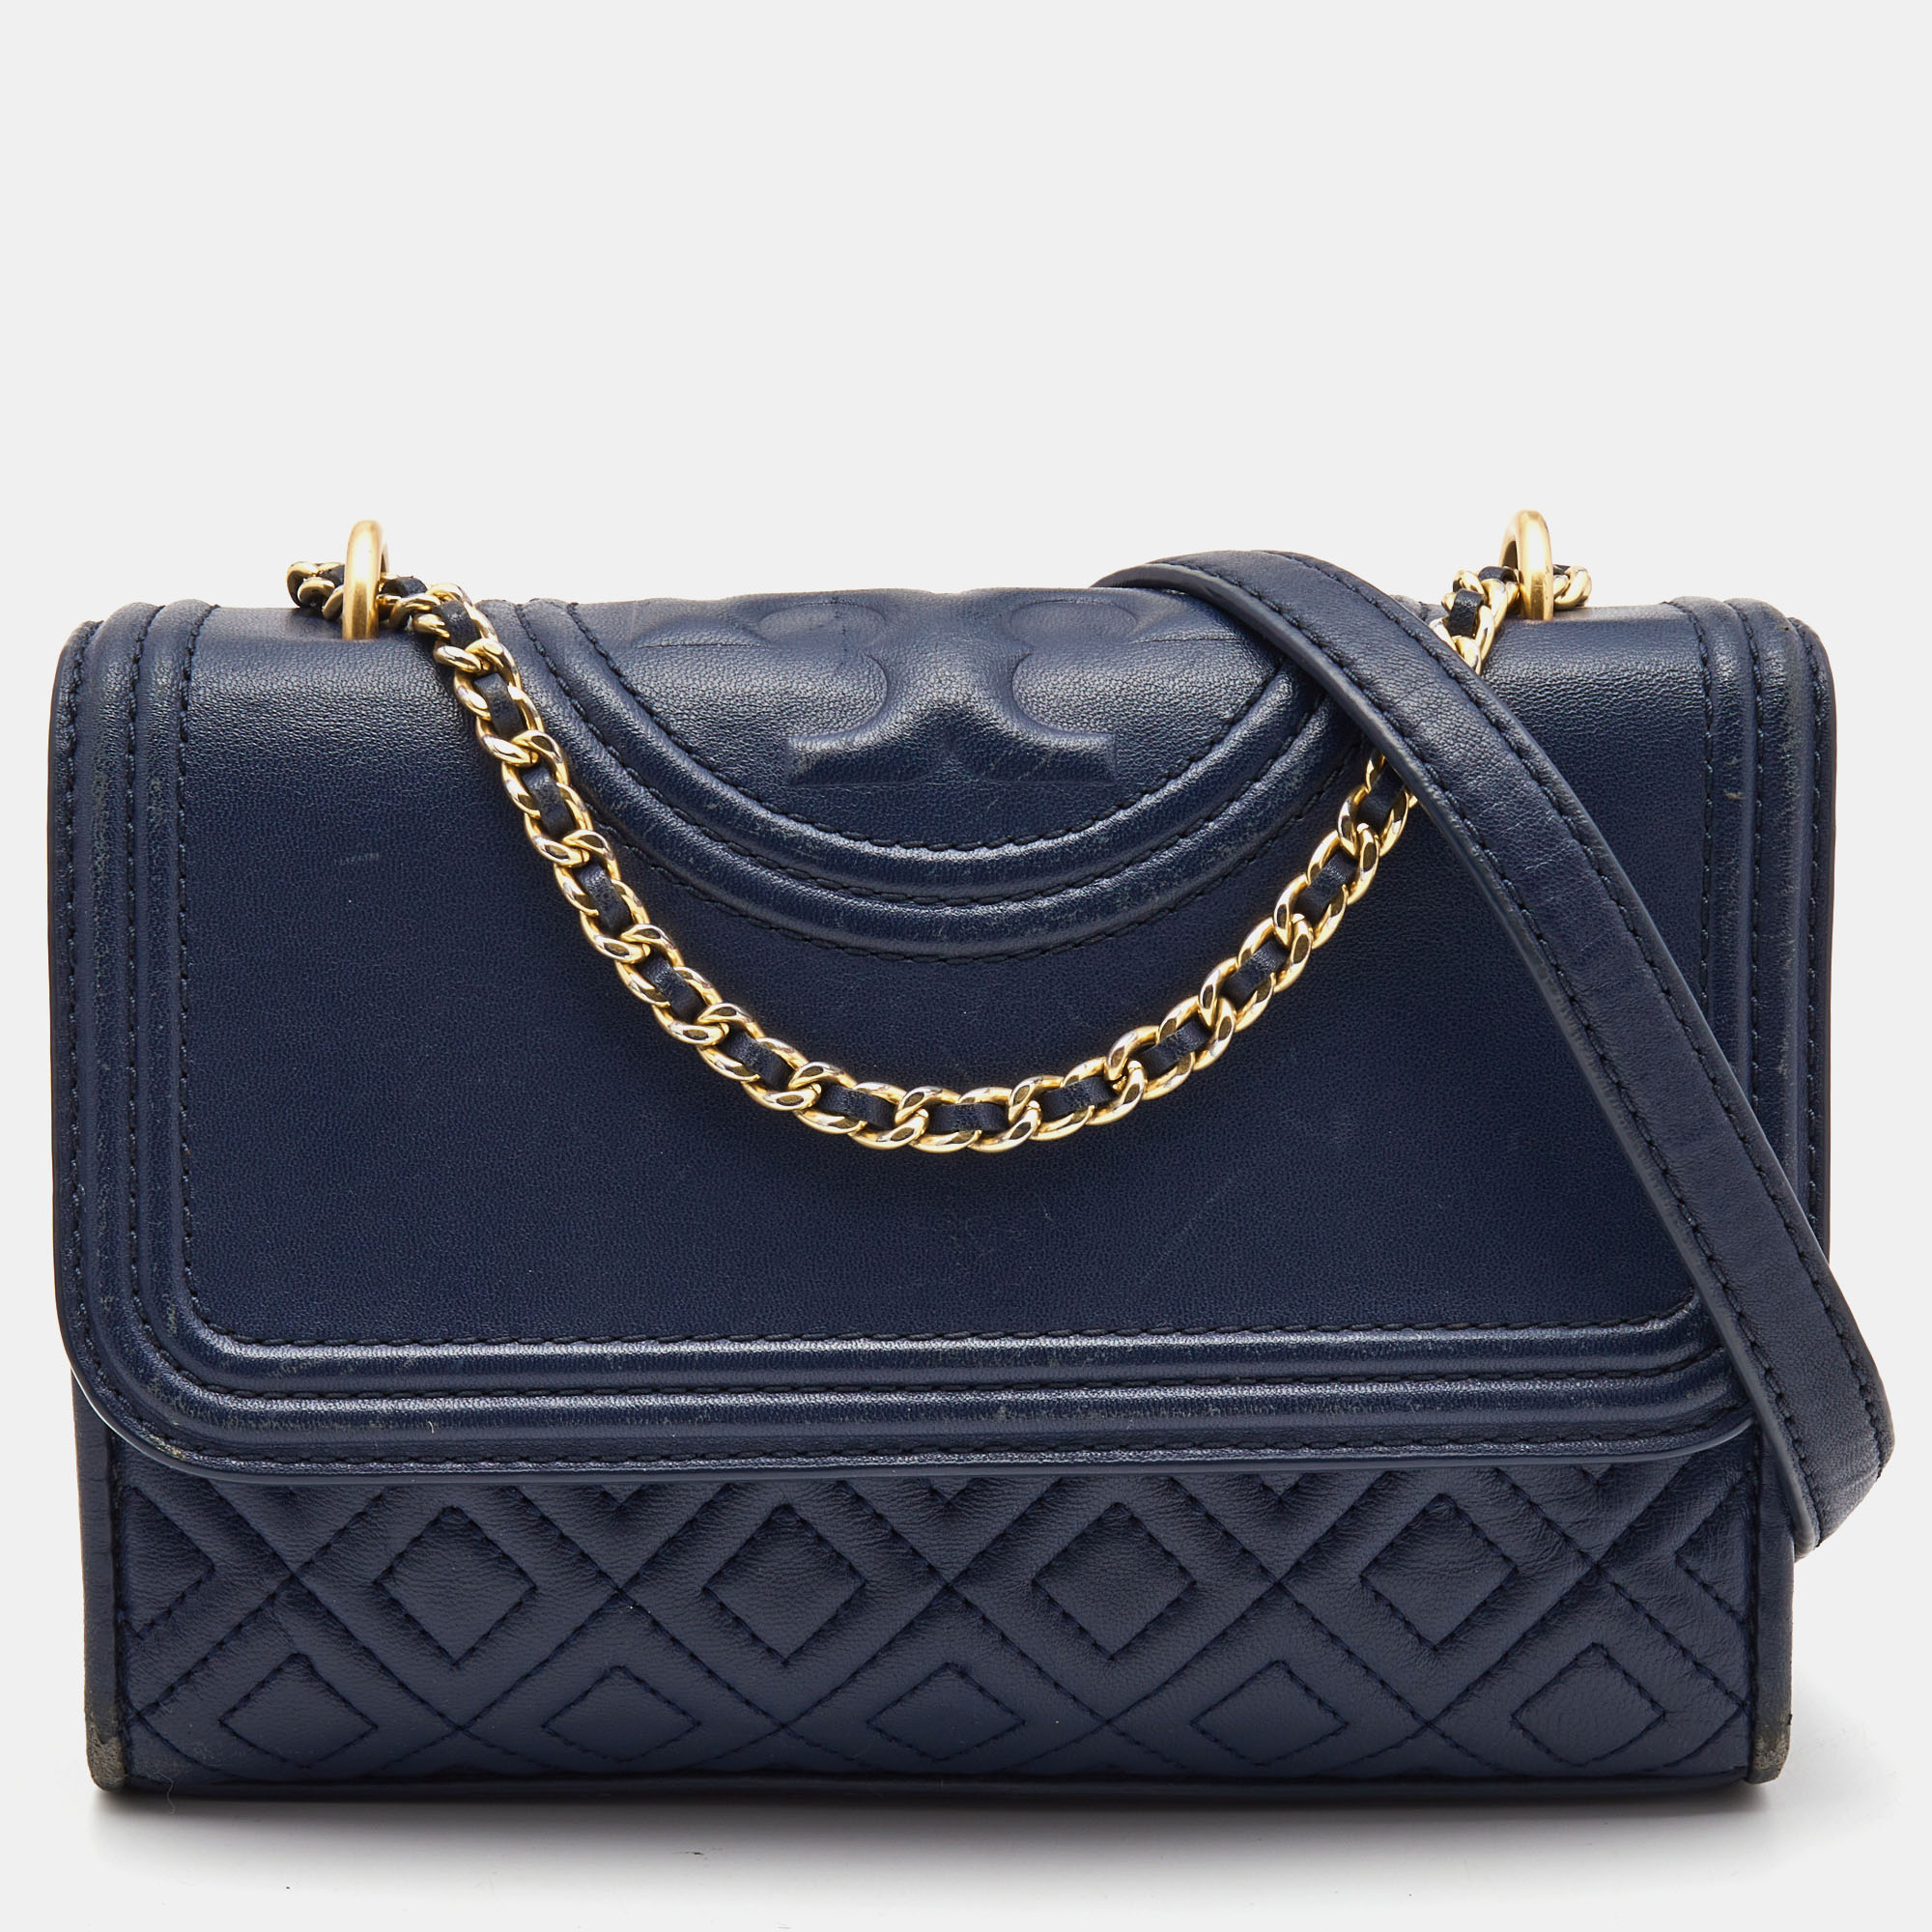 Pre-owned Tory Burch Navy Blue Leather Small Fleming Shoulder Bag